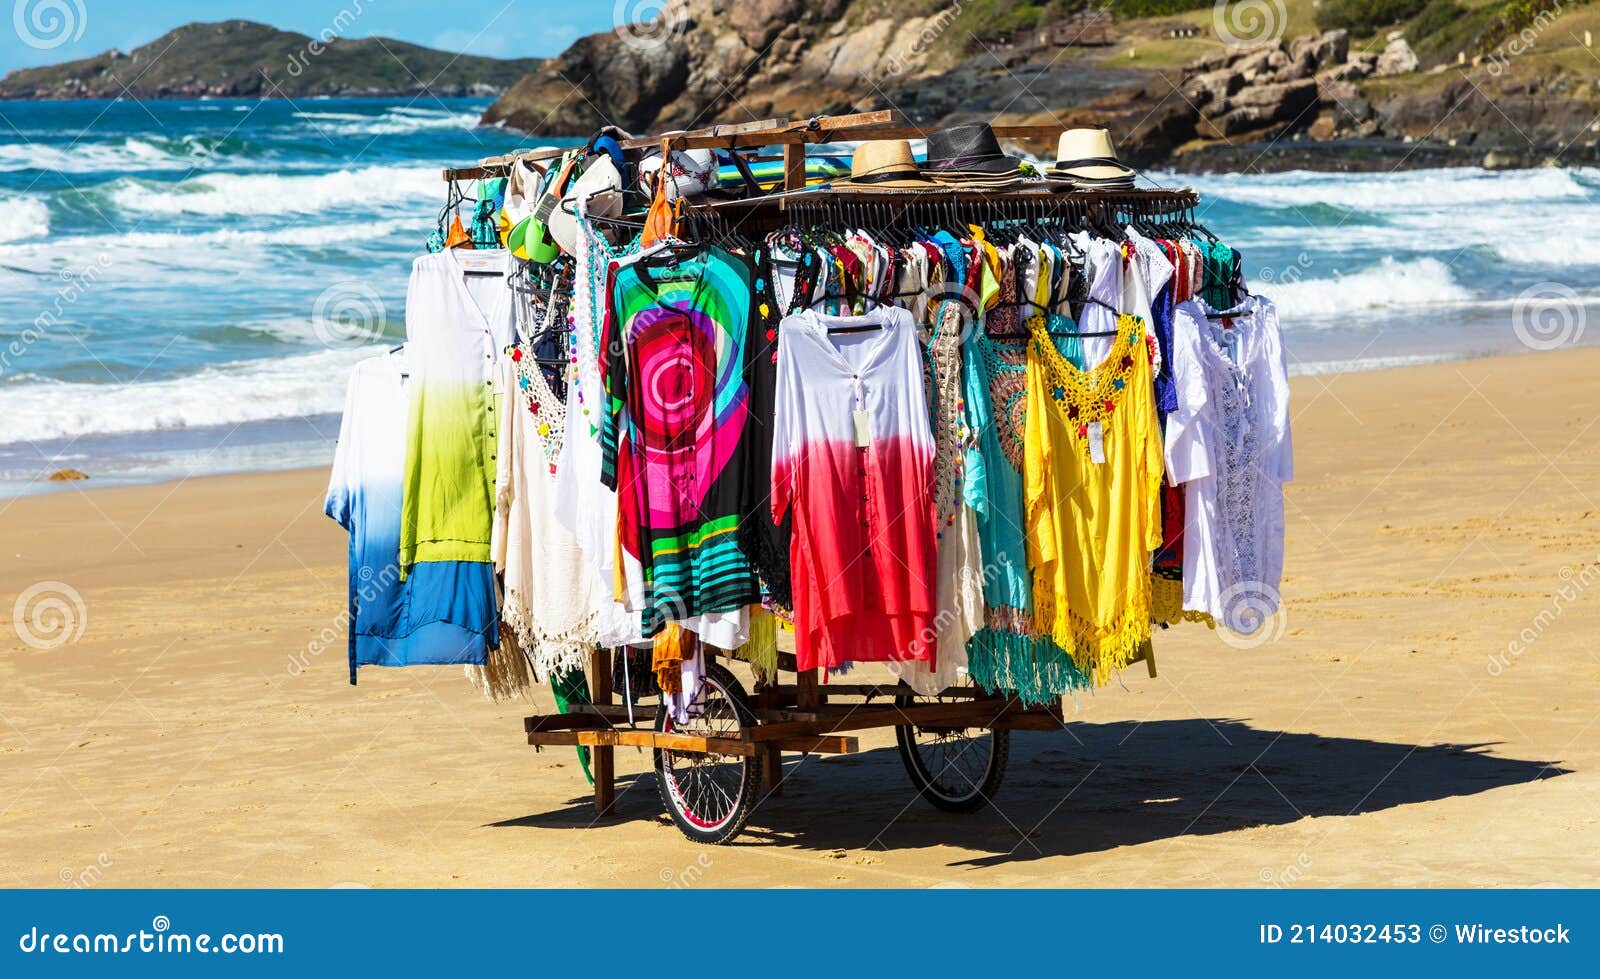 Beach Clothes Being Sold at the Santinho Beach in Florianopolis, Brazil  Stock Image - Image of beach, seascape: 214032453